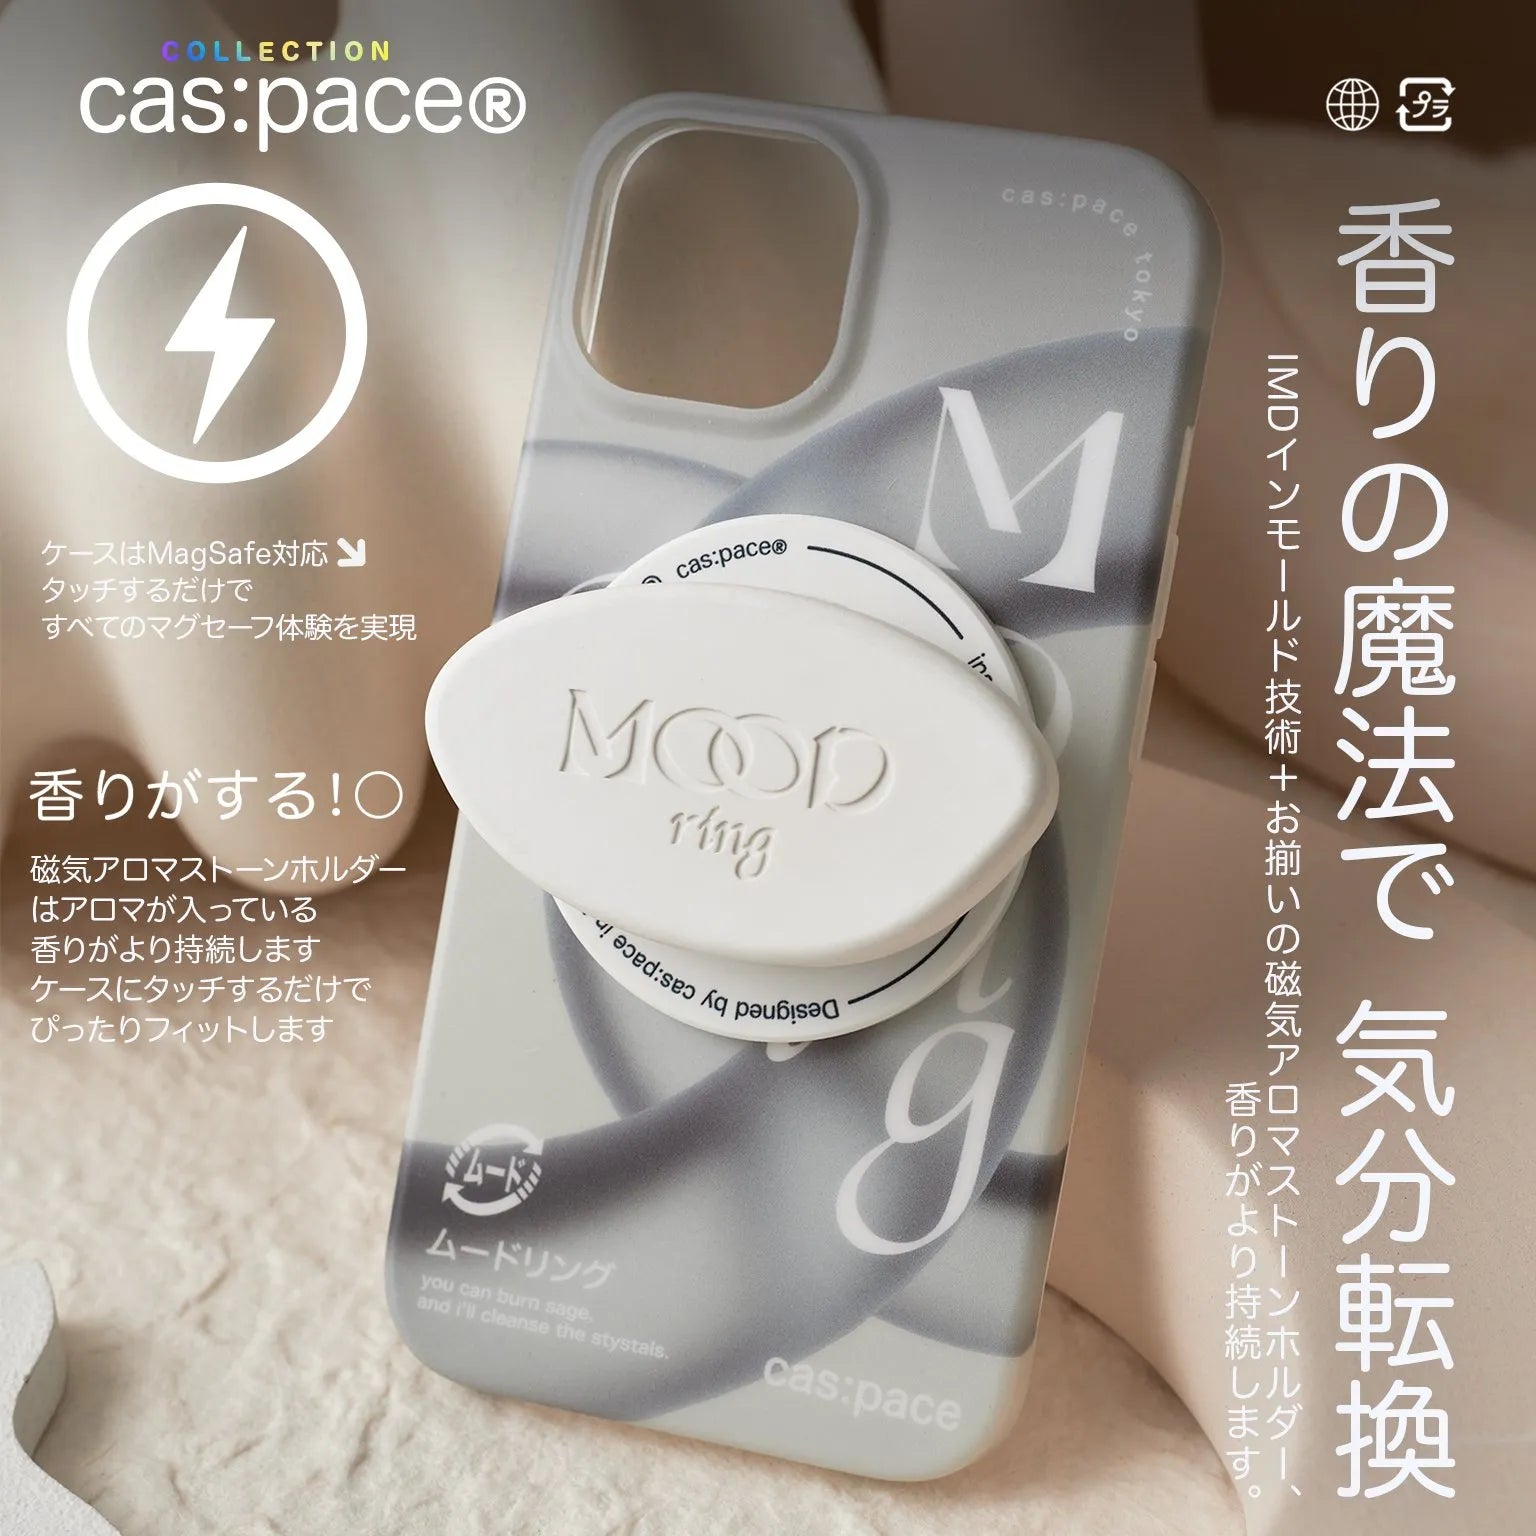 cas:pace collection MagSafe対応「mood ring」携帯ケース - cas:pace 殼空間